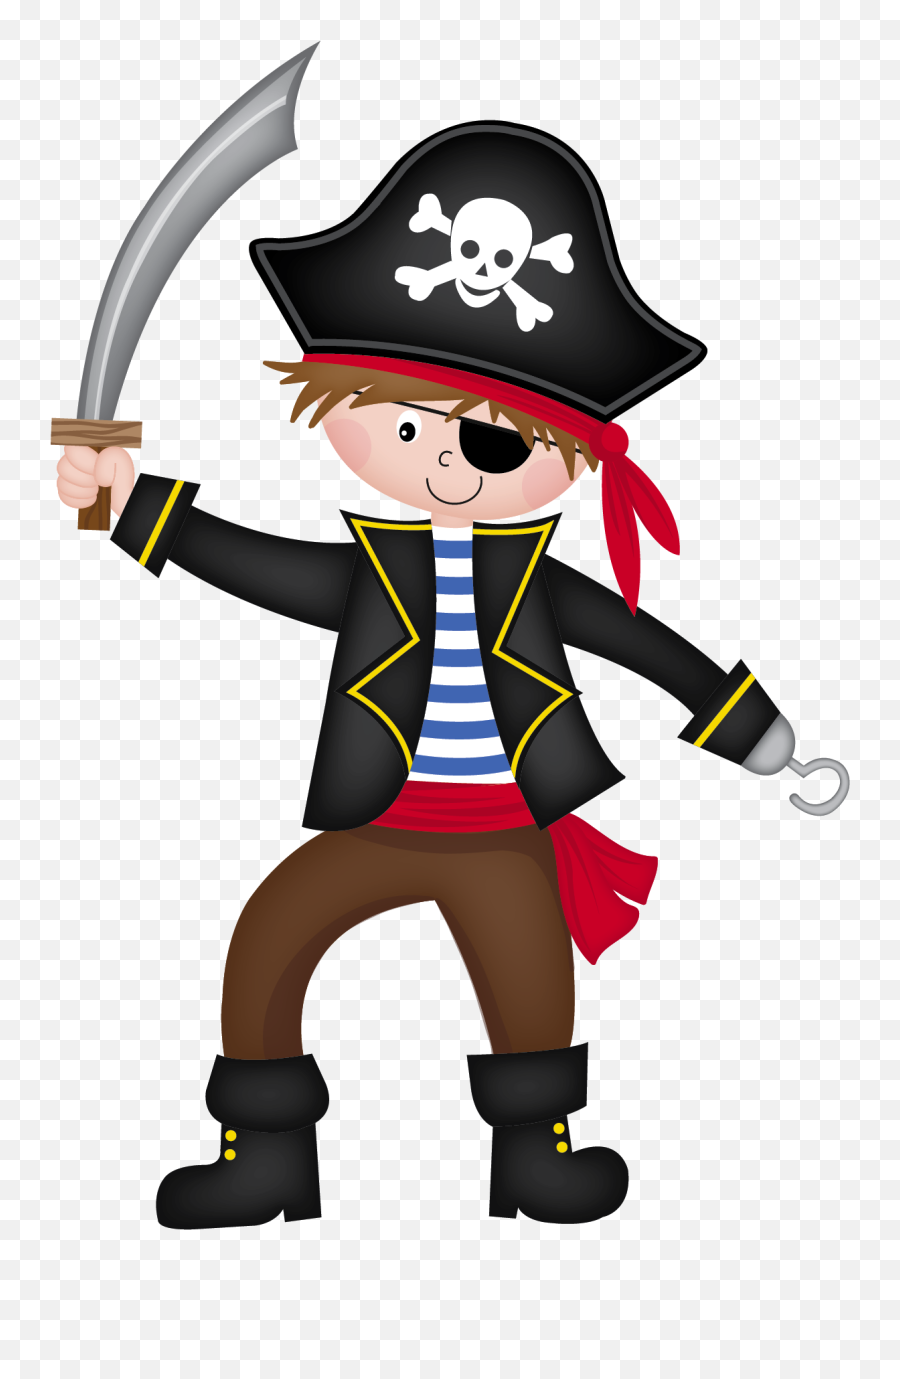 Captain Hook - Pirate With Hook Clipart Emoji,Pirate Clipart